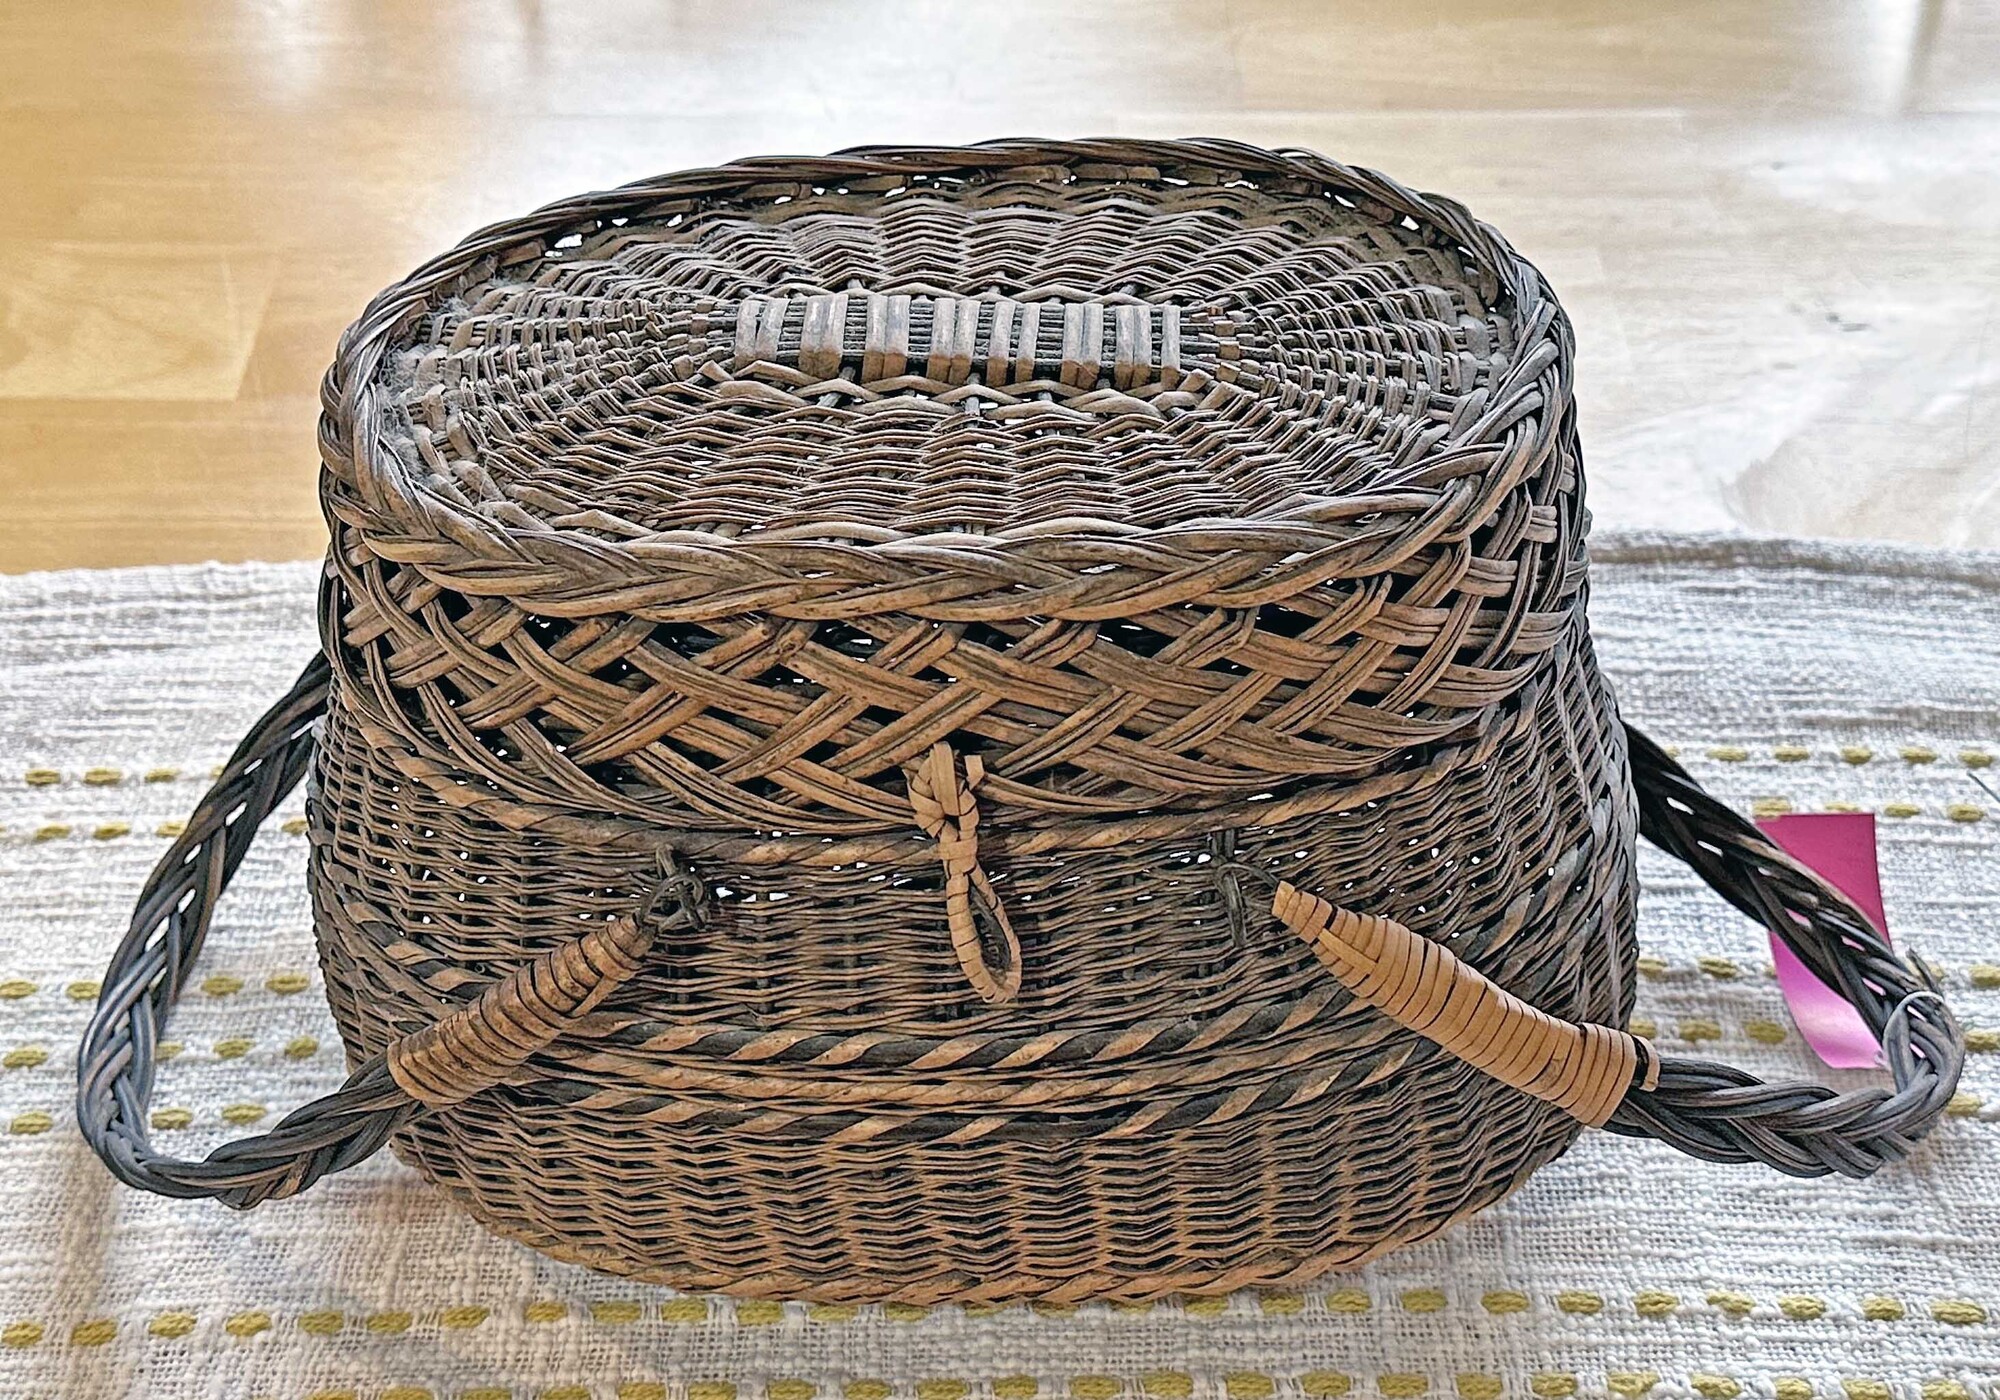 Vintage Purse Style Basket
12 In Wide x 9 In Tall.
Nice for sewing as well!